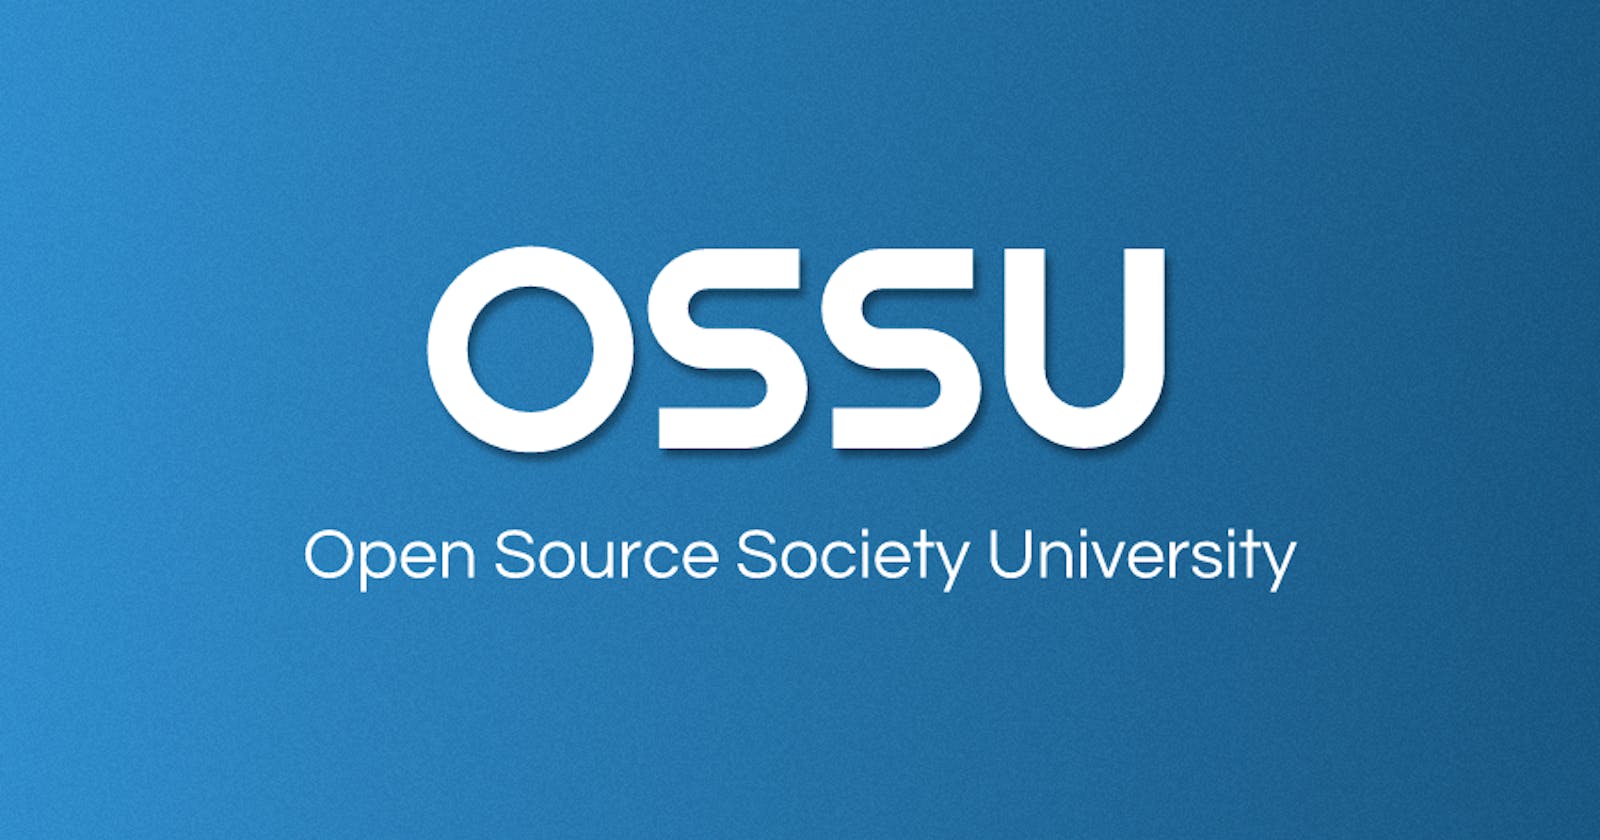 Computer Science Degree - Created By Open Source Society University